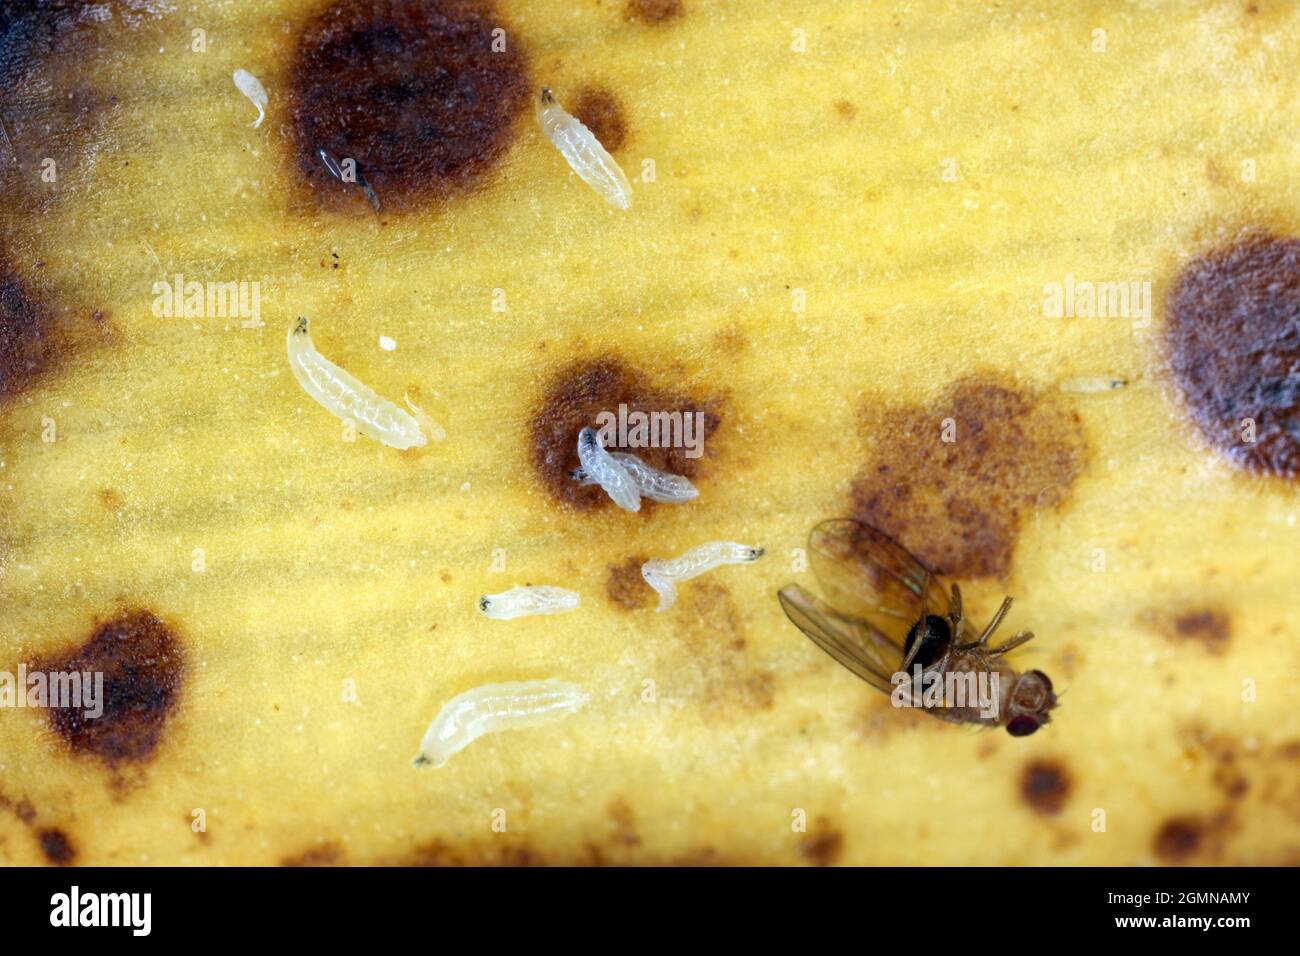 Common fruit fly or vinegar fly - Drosophila melanogaster and larvae - maggots. It is a species of fly in the family Drosophilidae. It is pest. Stock Photo